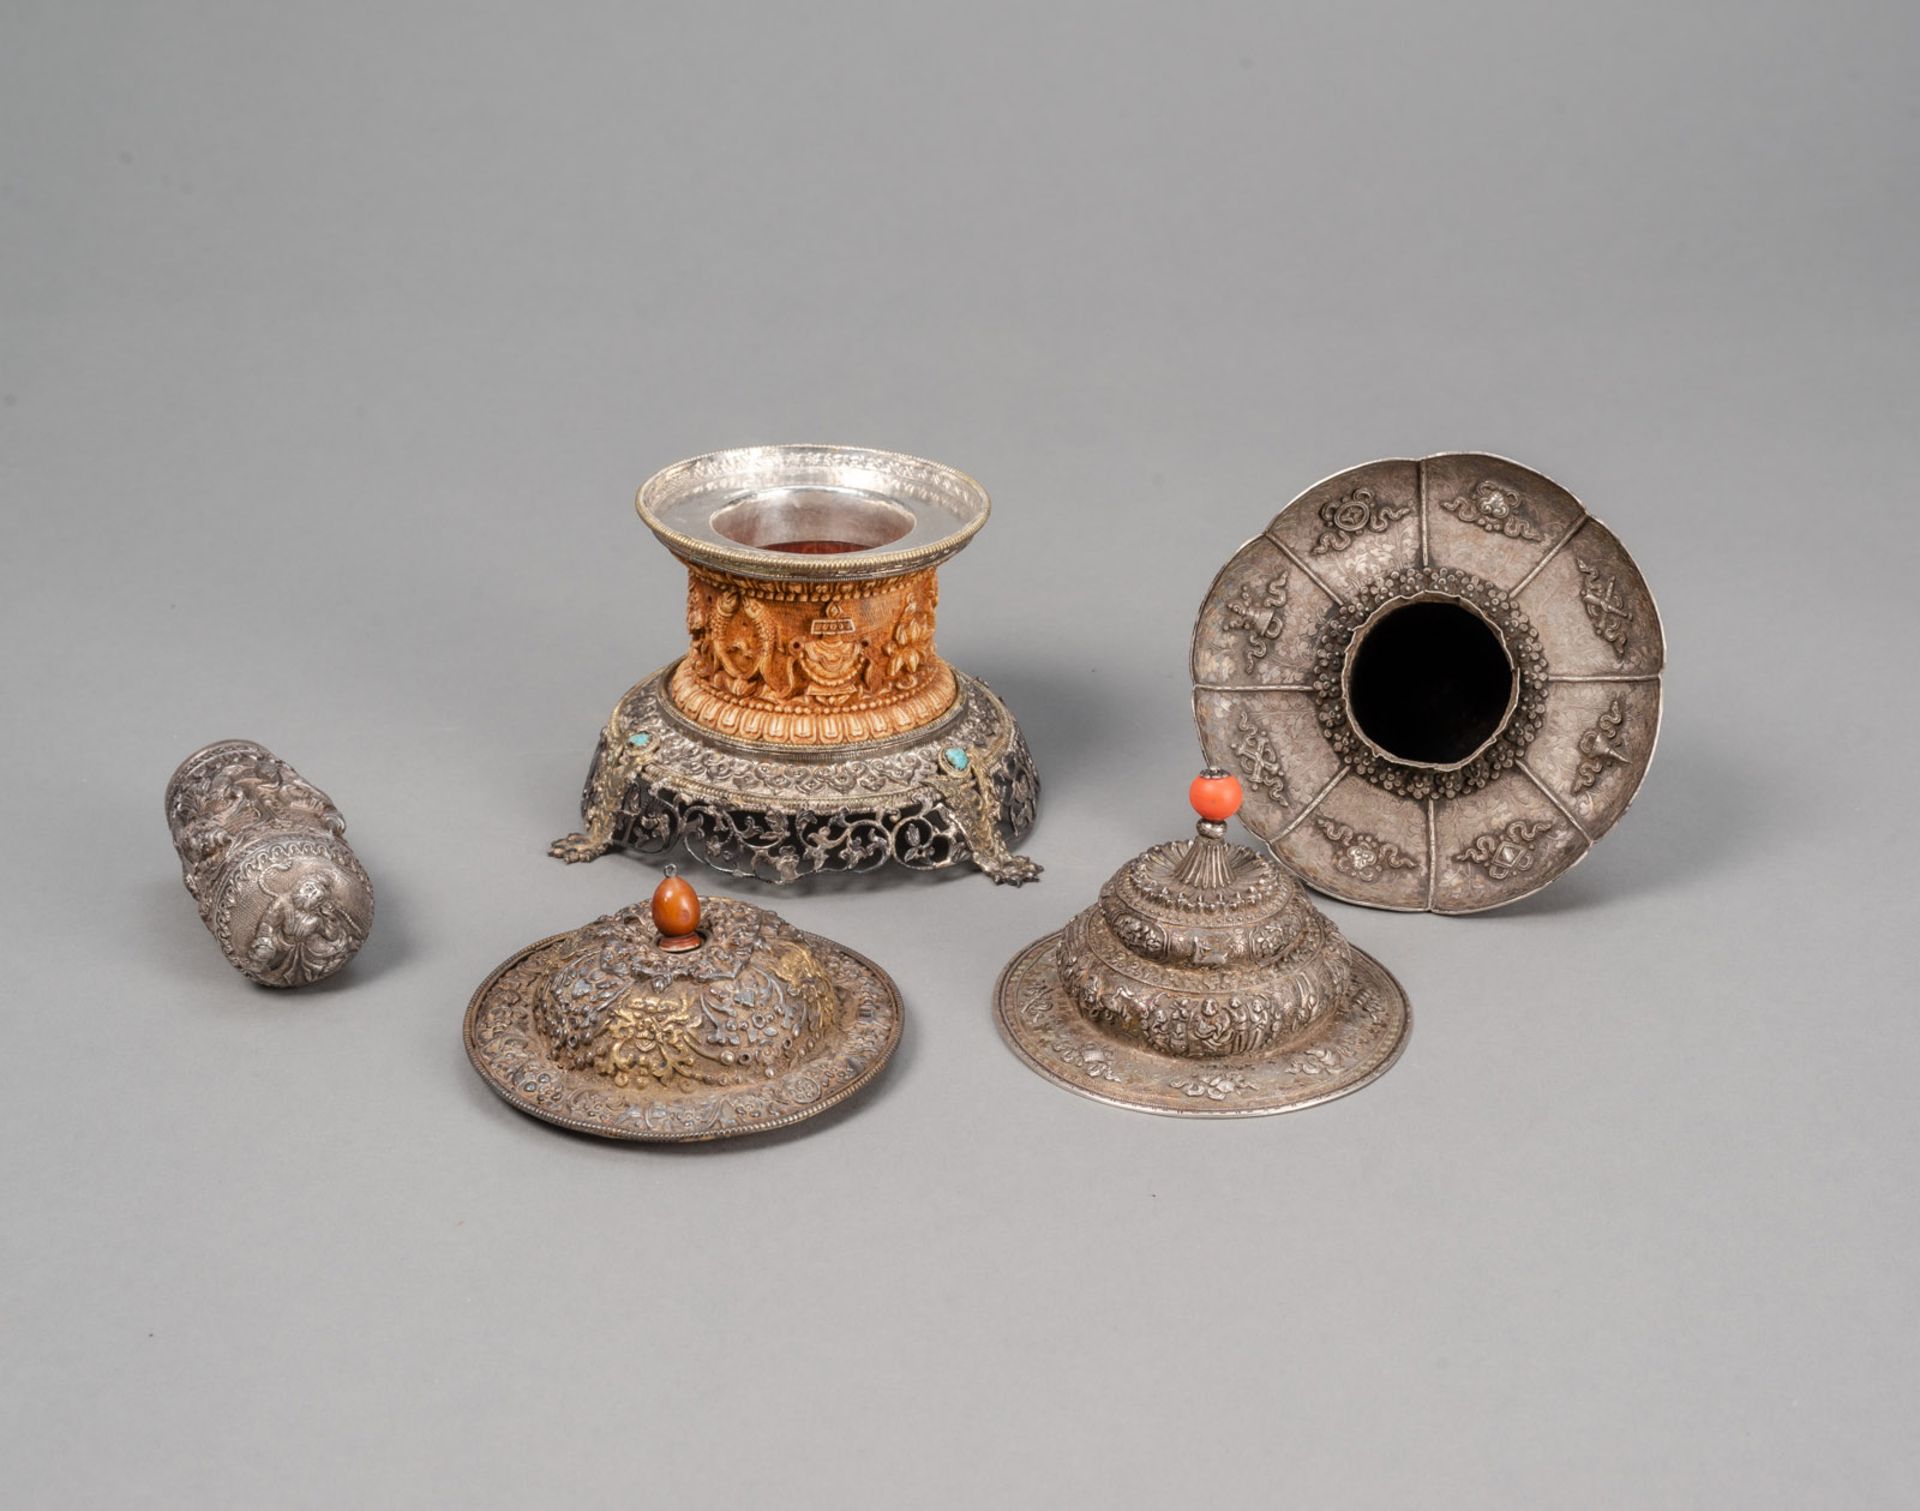 A PARCEL-GILT SILVER-MOUNTED BONE BOX AND COVER, A CUP STAND, AND A HANDLE - Image 3 of 4